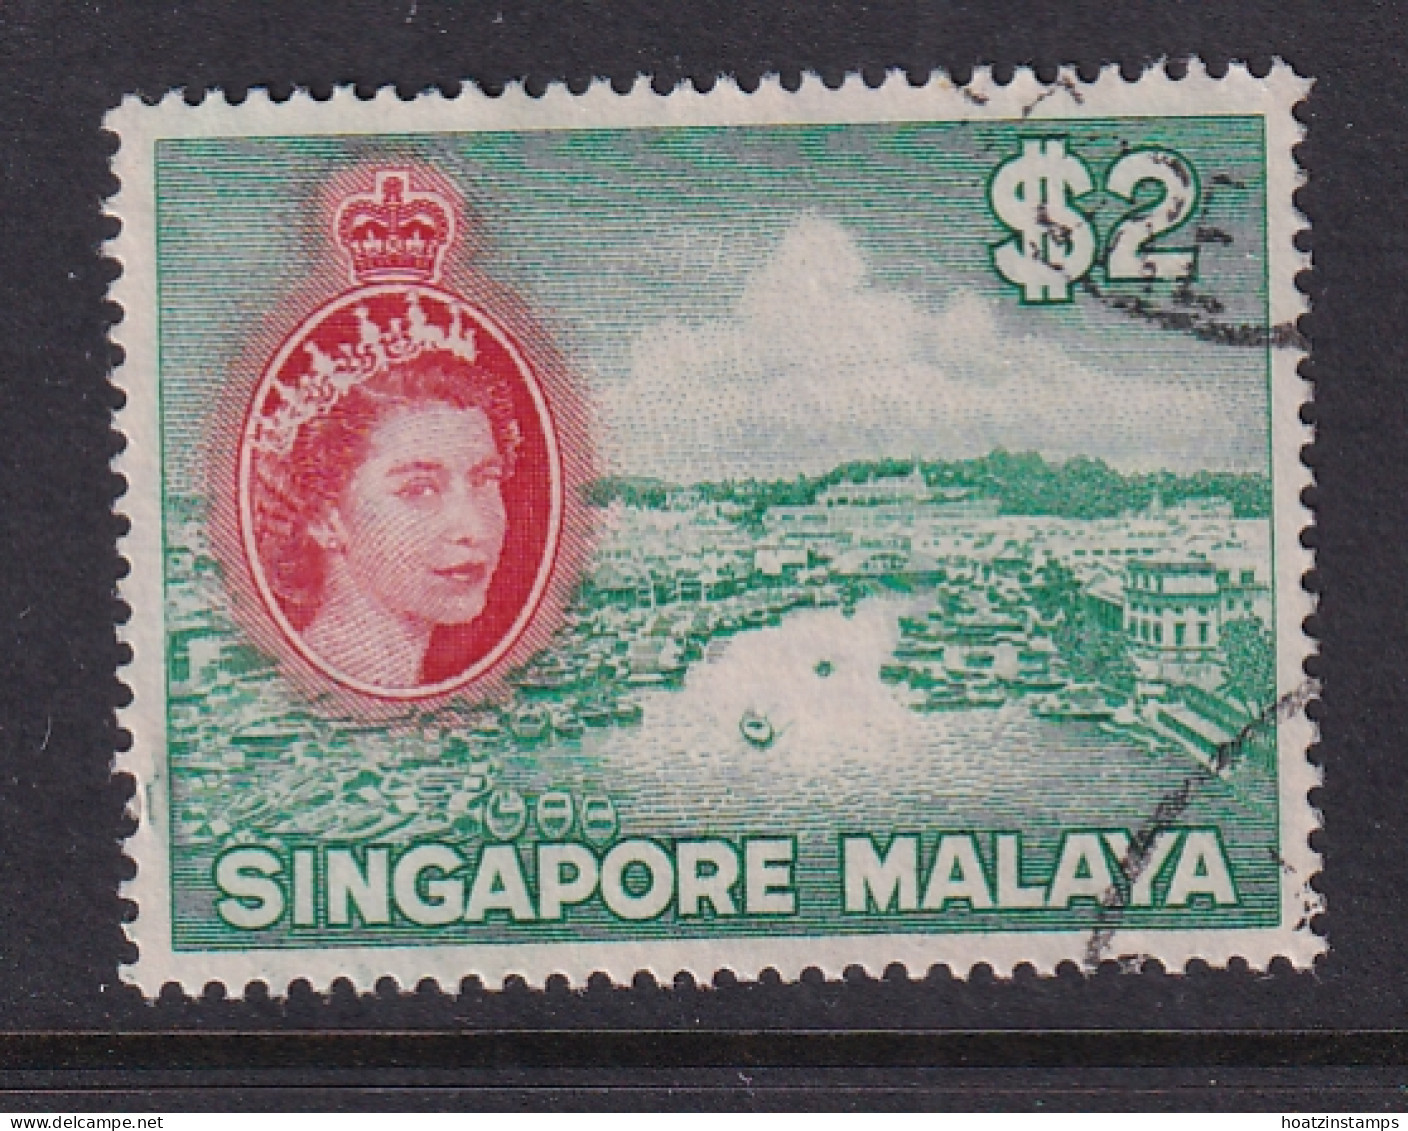 Singapore: 1955/59   QE II - Pictorial    SG51    $2    Used - Singapour (...-1959)